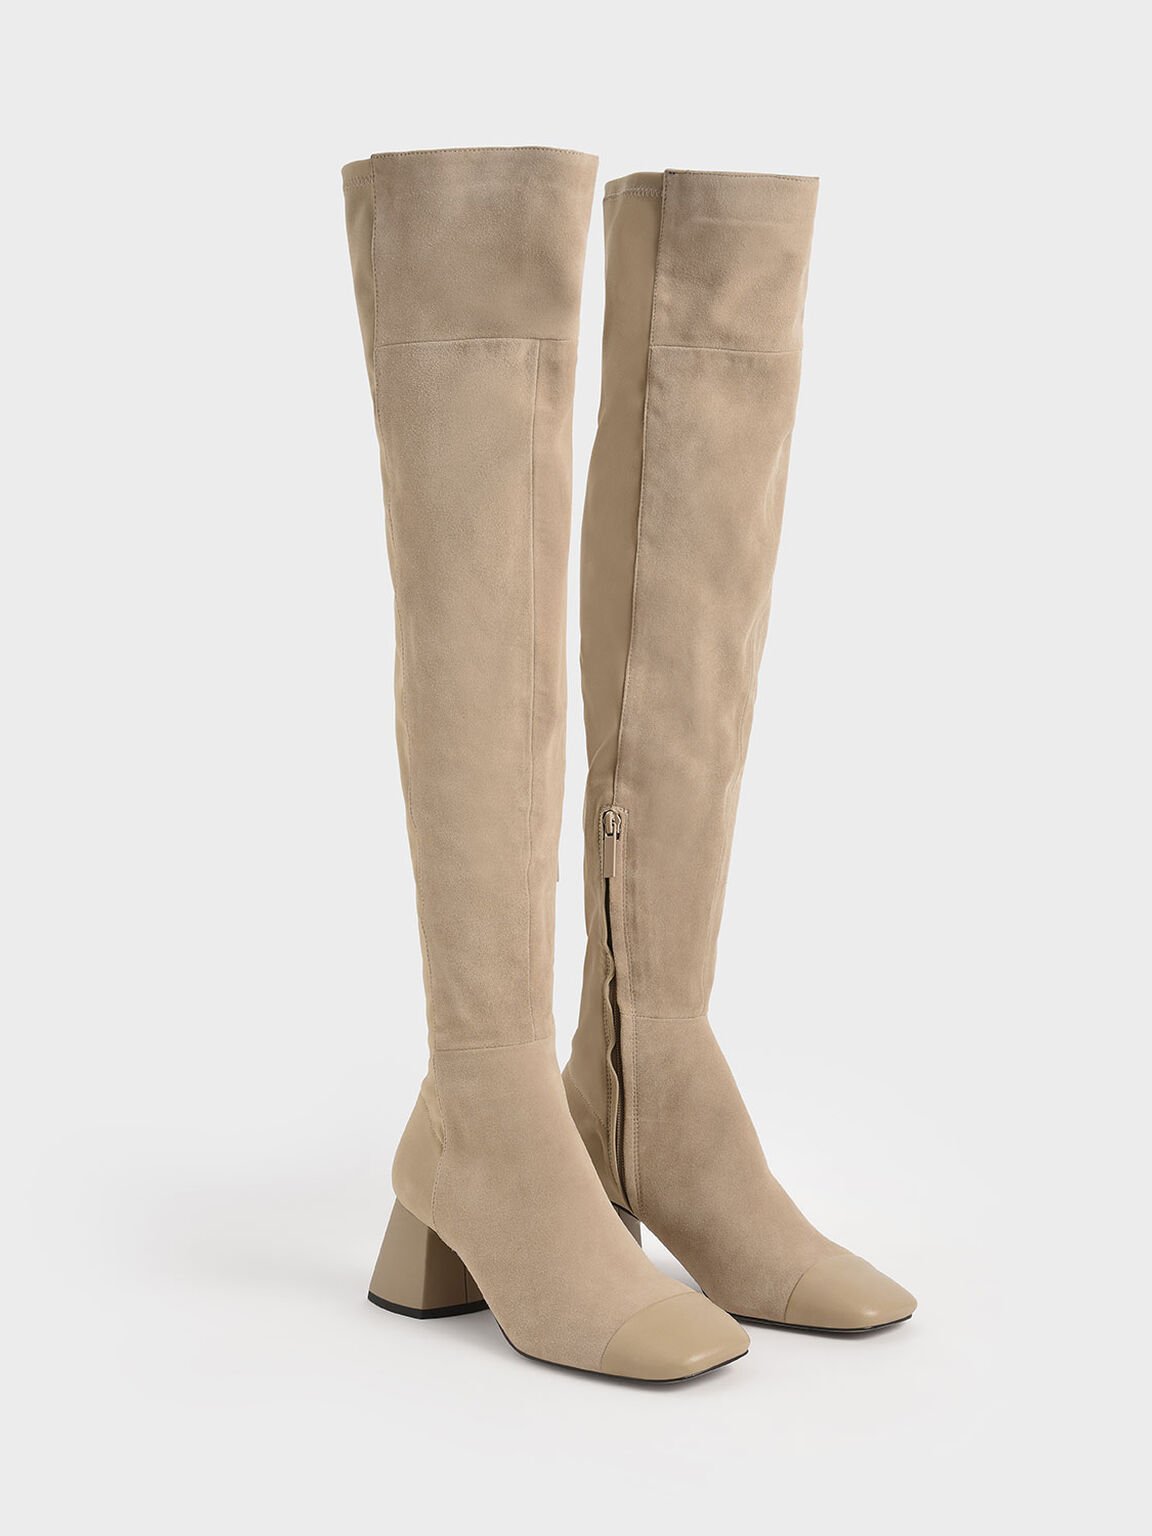 Leather & Kid Suede Thigh High Boots, Sand, hi-res